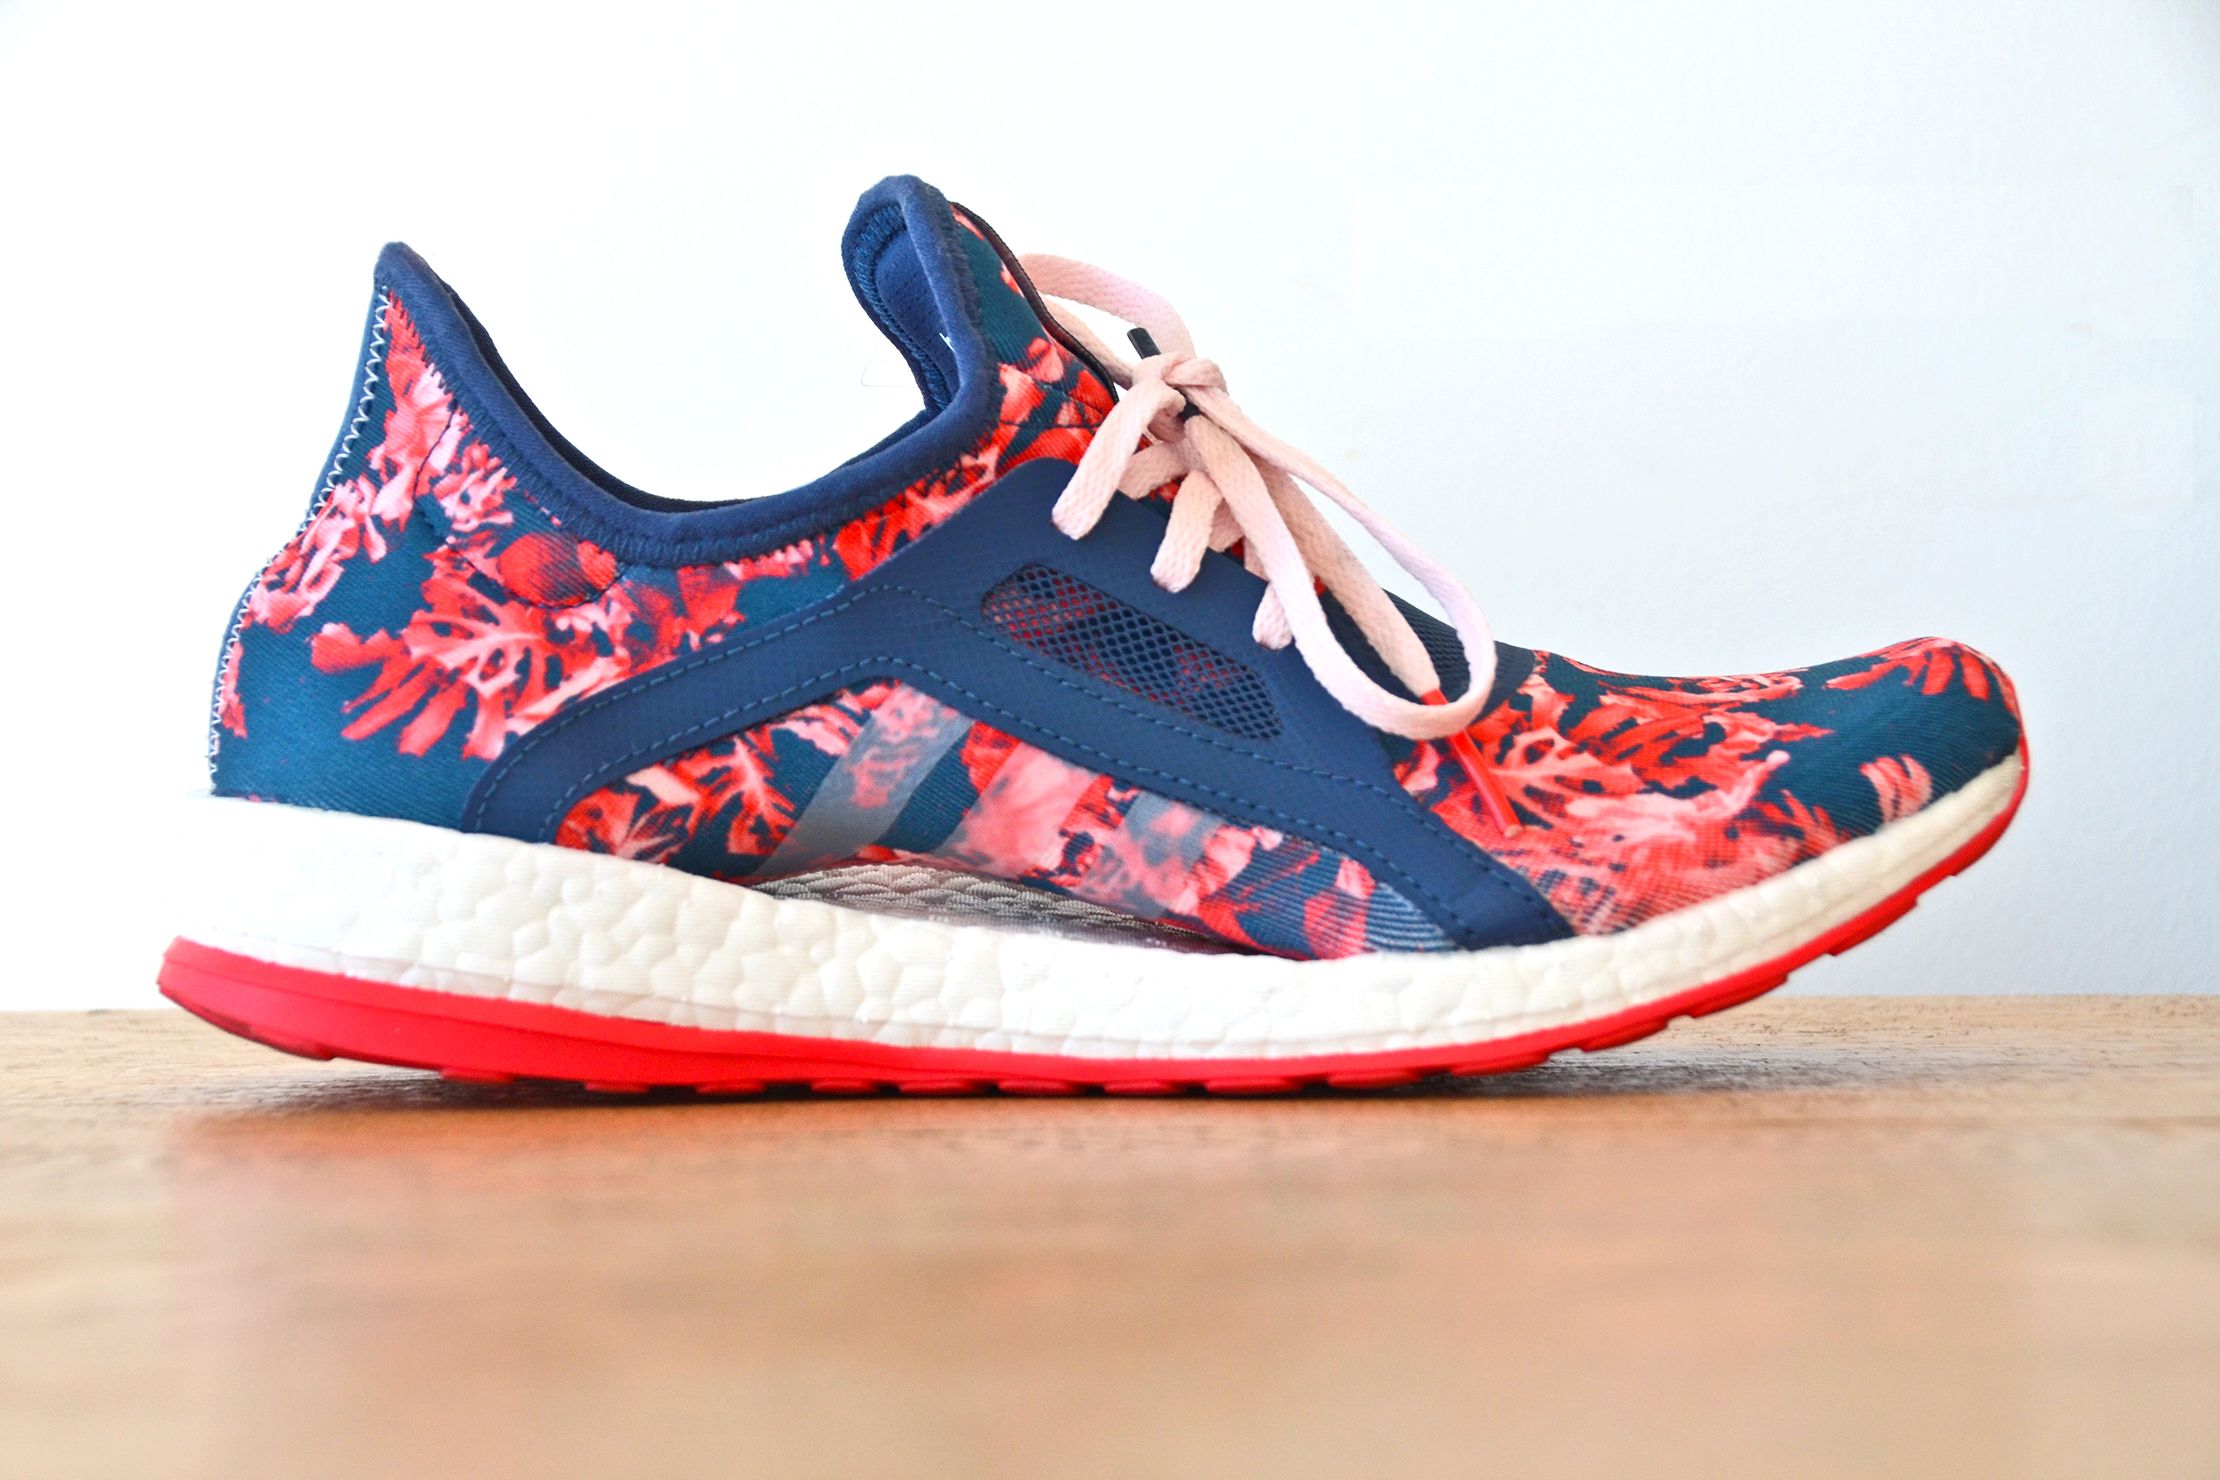 adidas pure boost women's review